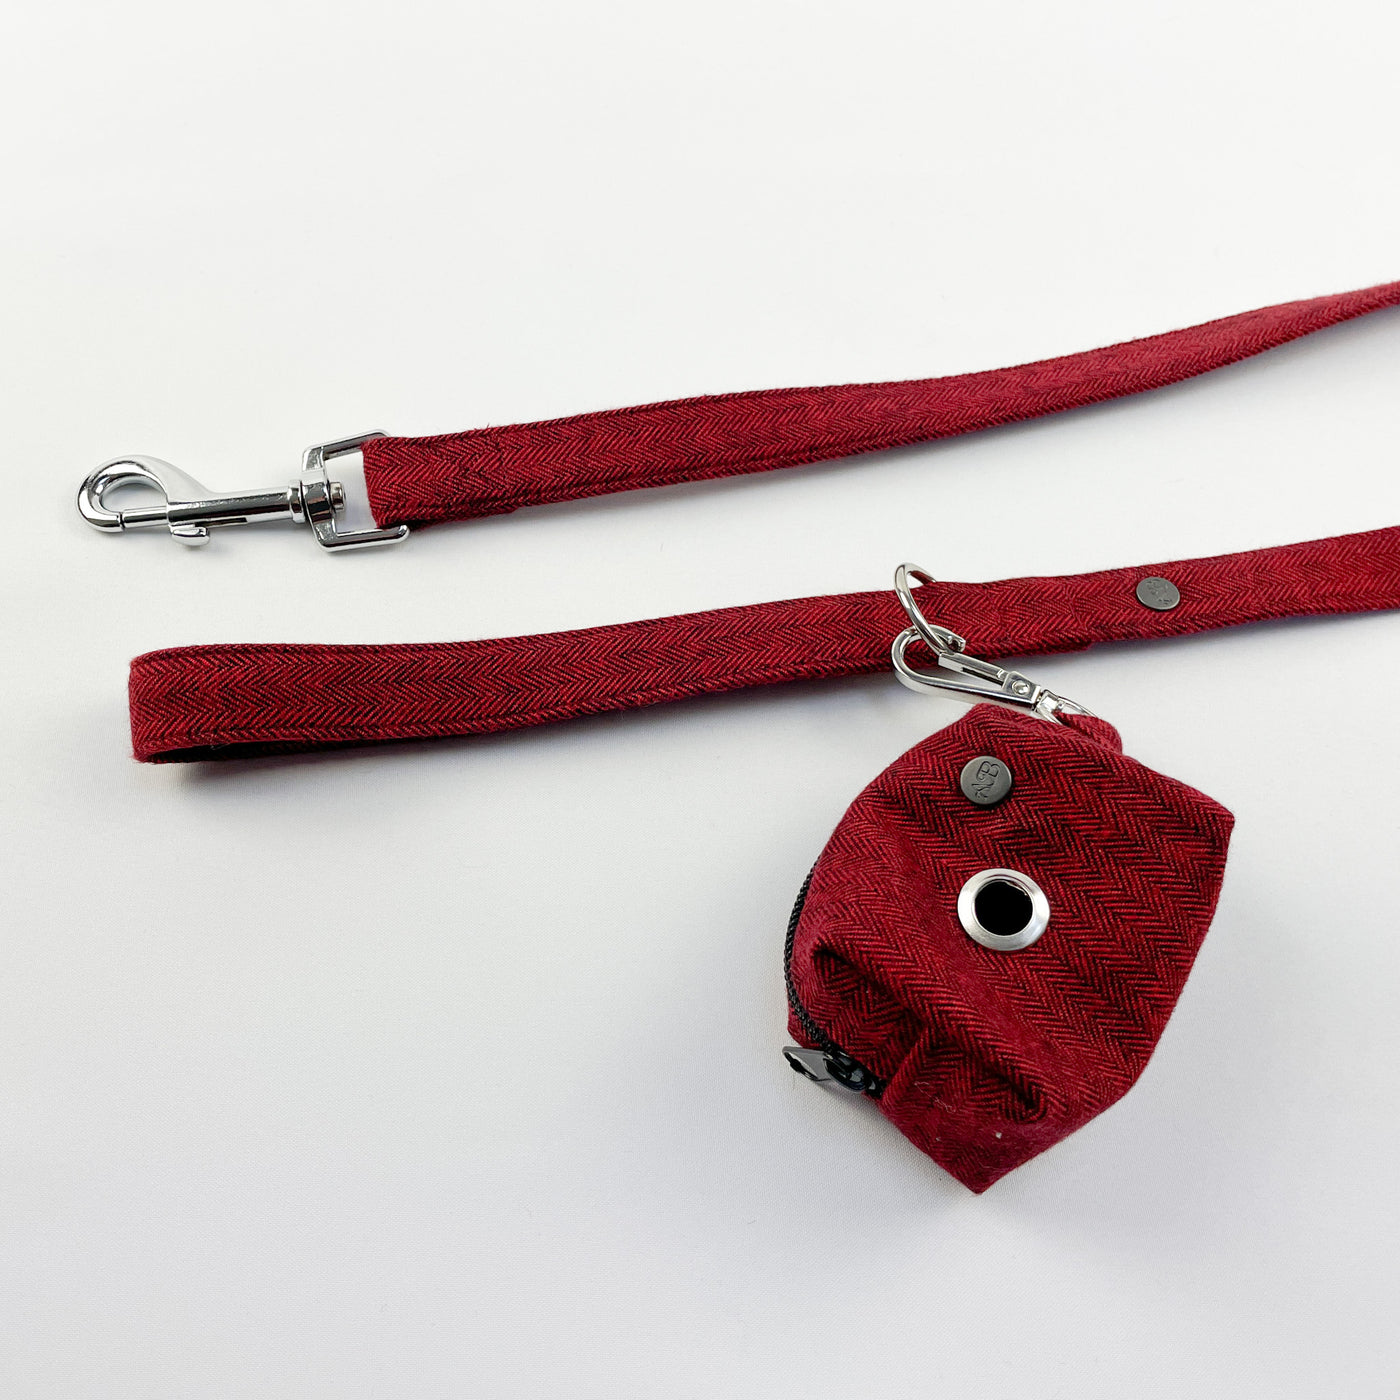 Cranberry Herringbone poop bag holder attached to lead